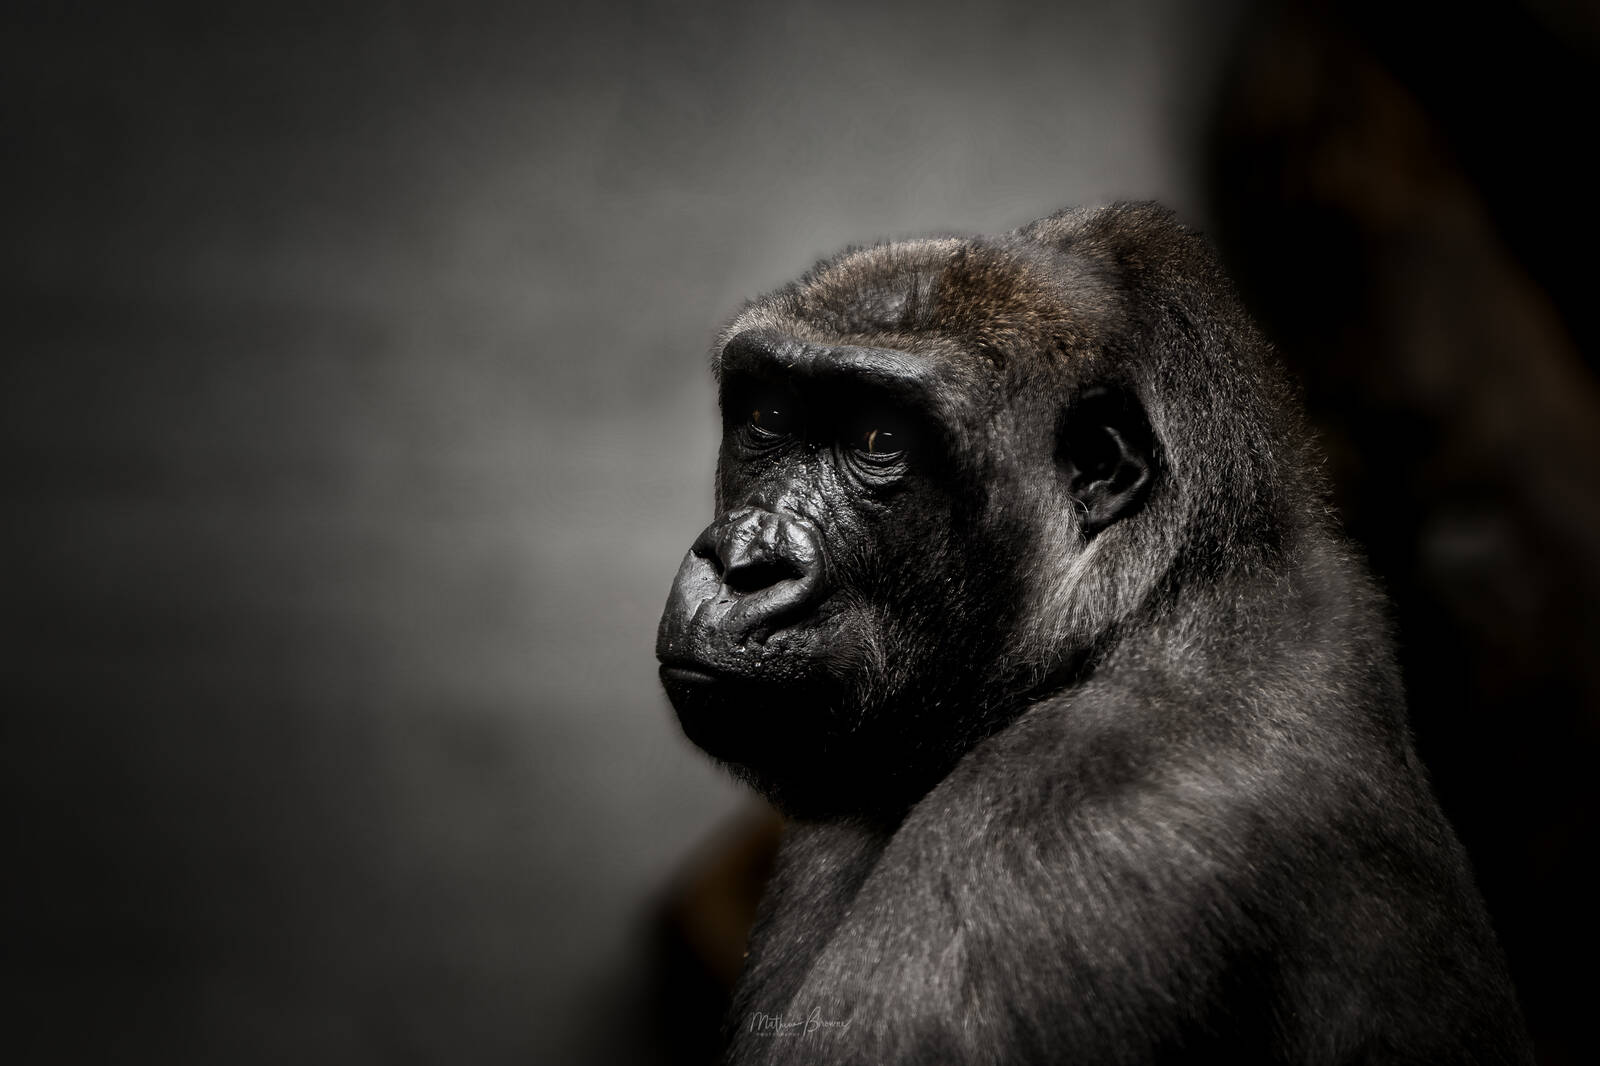 Image of Zoo Zurich by Mathew Browne